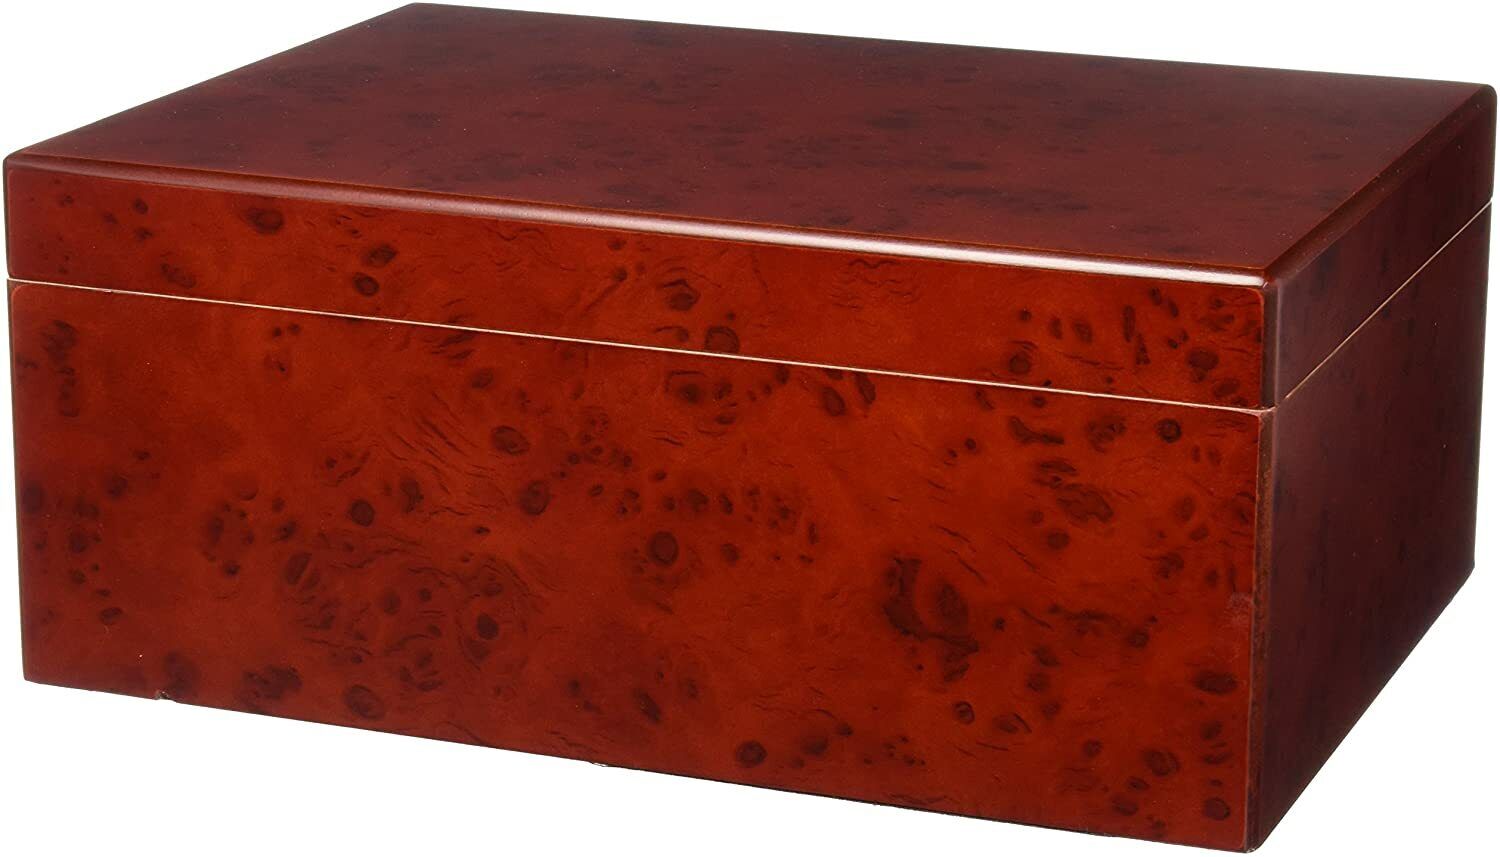 Orleans Group Burl Humidor, 50 Cigar Count